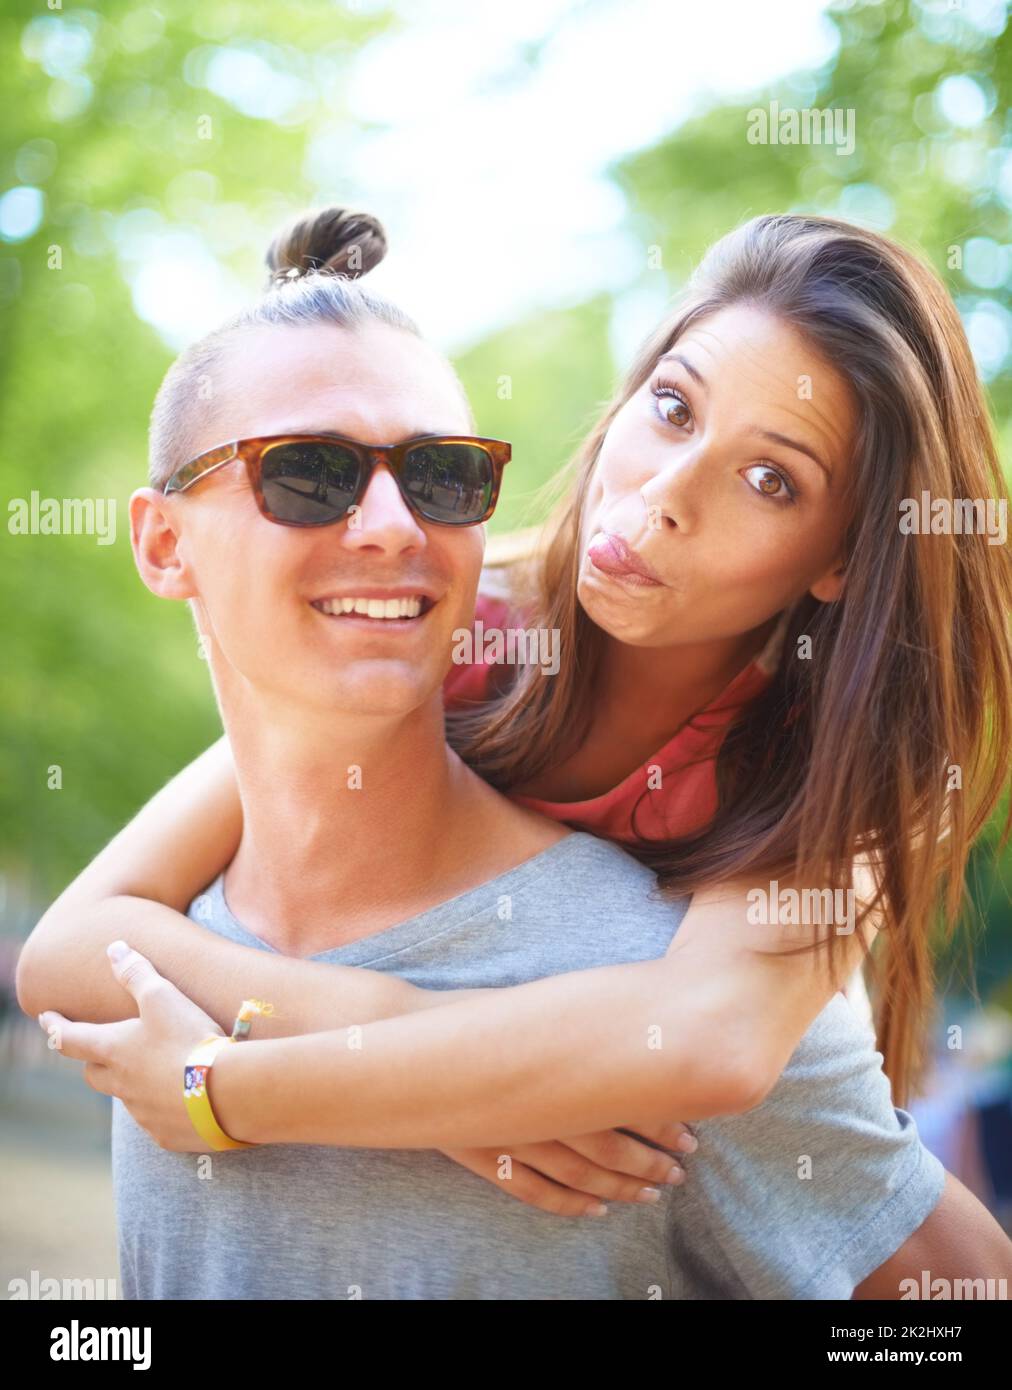 Care-free couple. A trendy young man giving his female friend a piggyback ride. Stock Photo